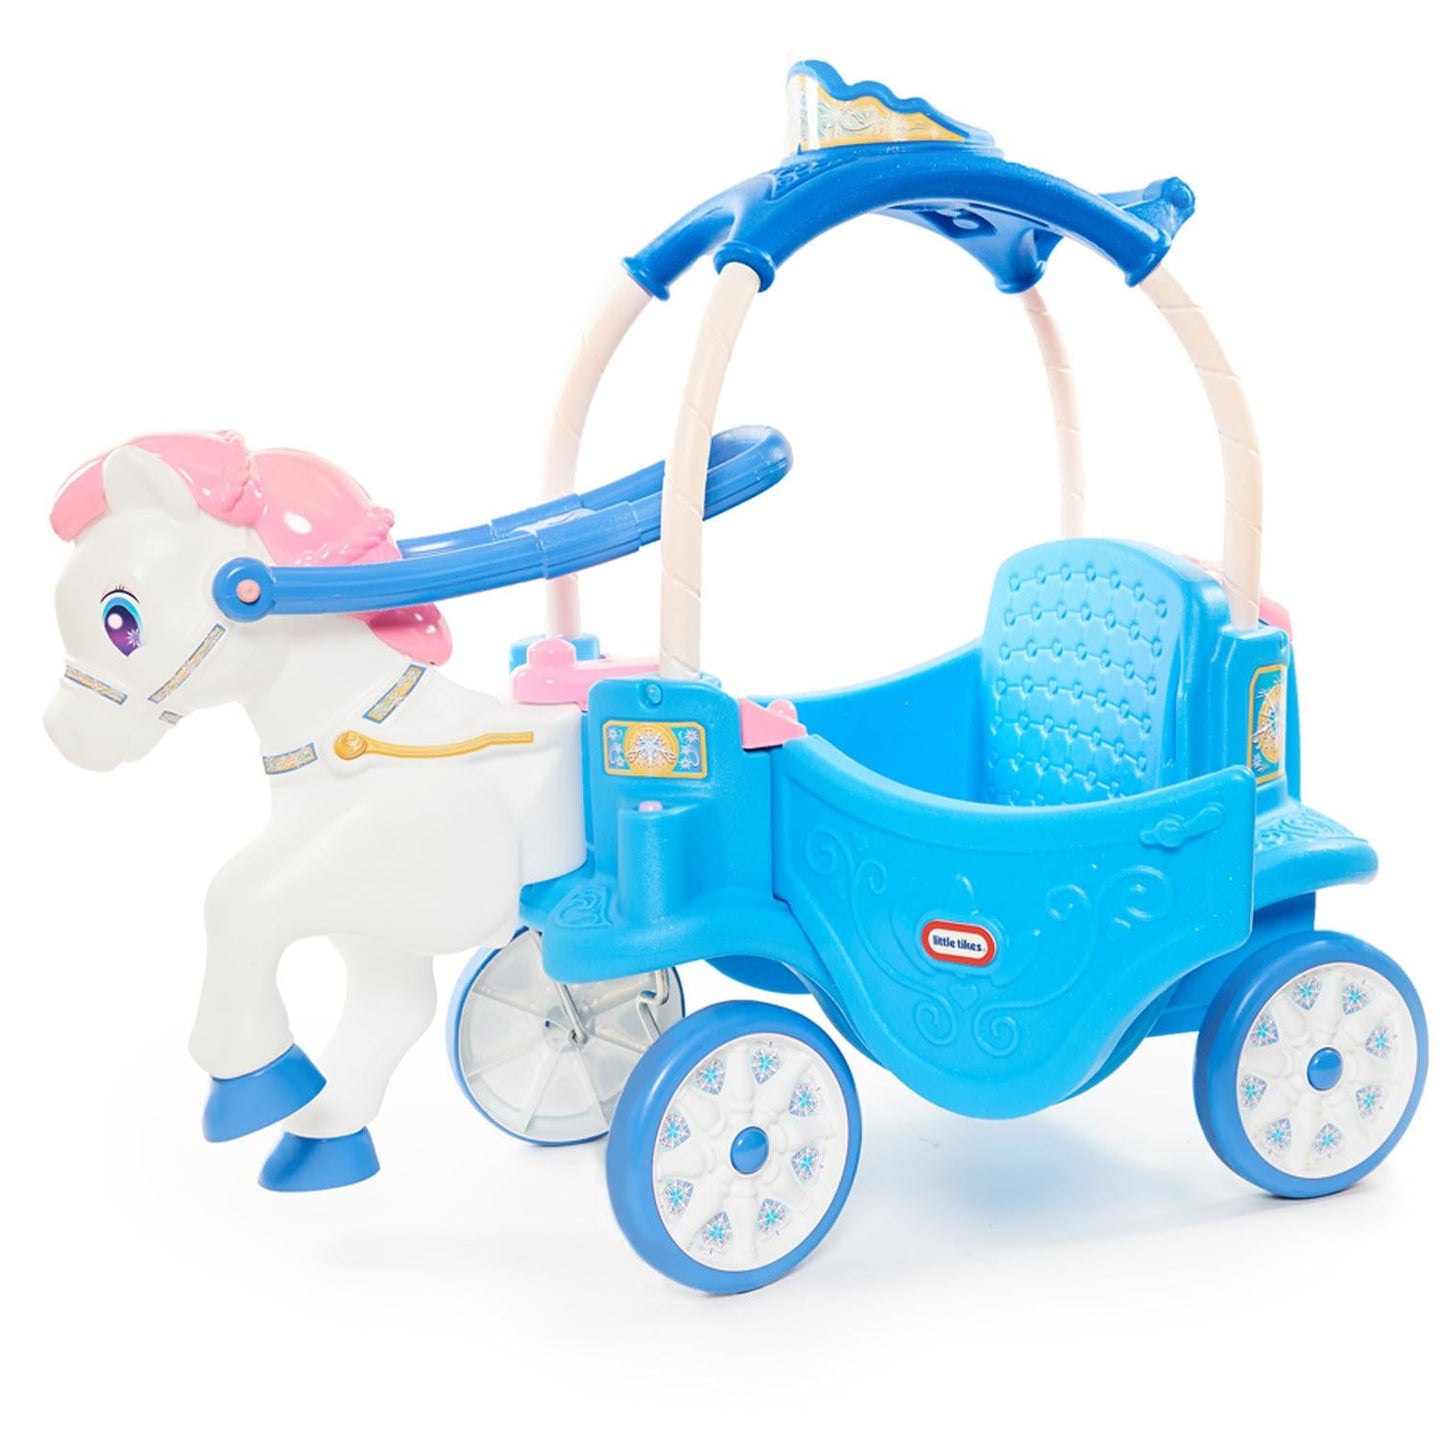 PRINCESS HORSE & CARRIAGE - FROSTY BLUE